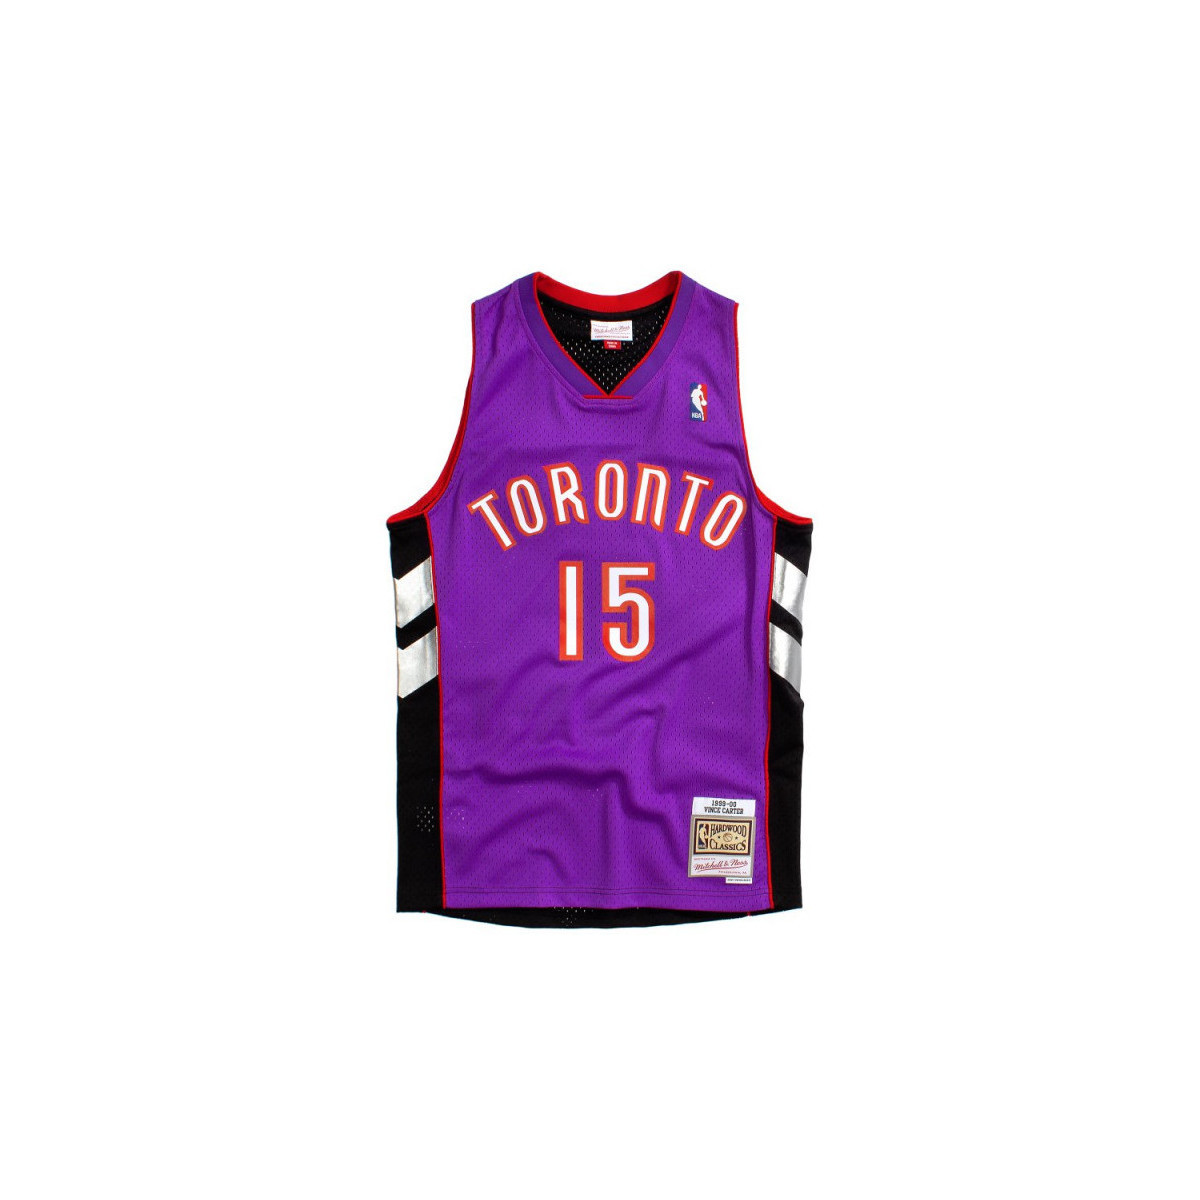 Vêtements T-shirts manches courtes Mitchell And Ness Maillot NBA swingman Vince Car Multicolore